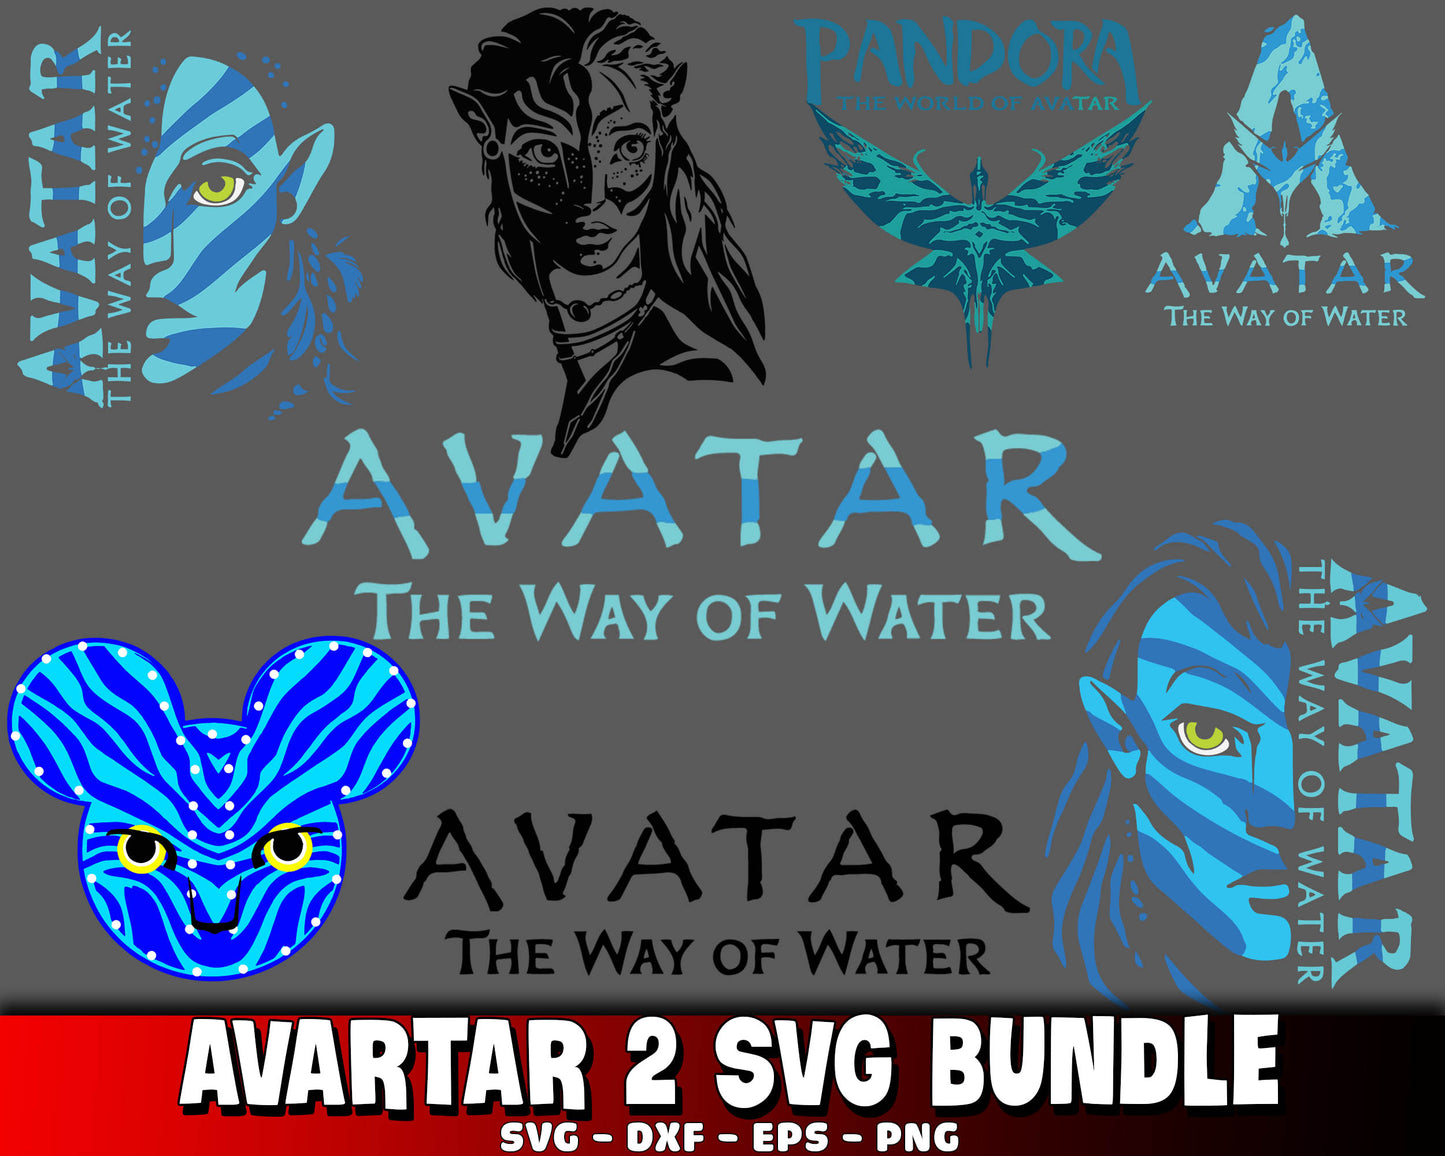 Avartar 2 svg bundle , avartar svg , Avatar the way of the water Avatar 2 SVG DXF EPS PNG , for Cricut, Silhouette, digital, file cut